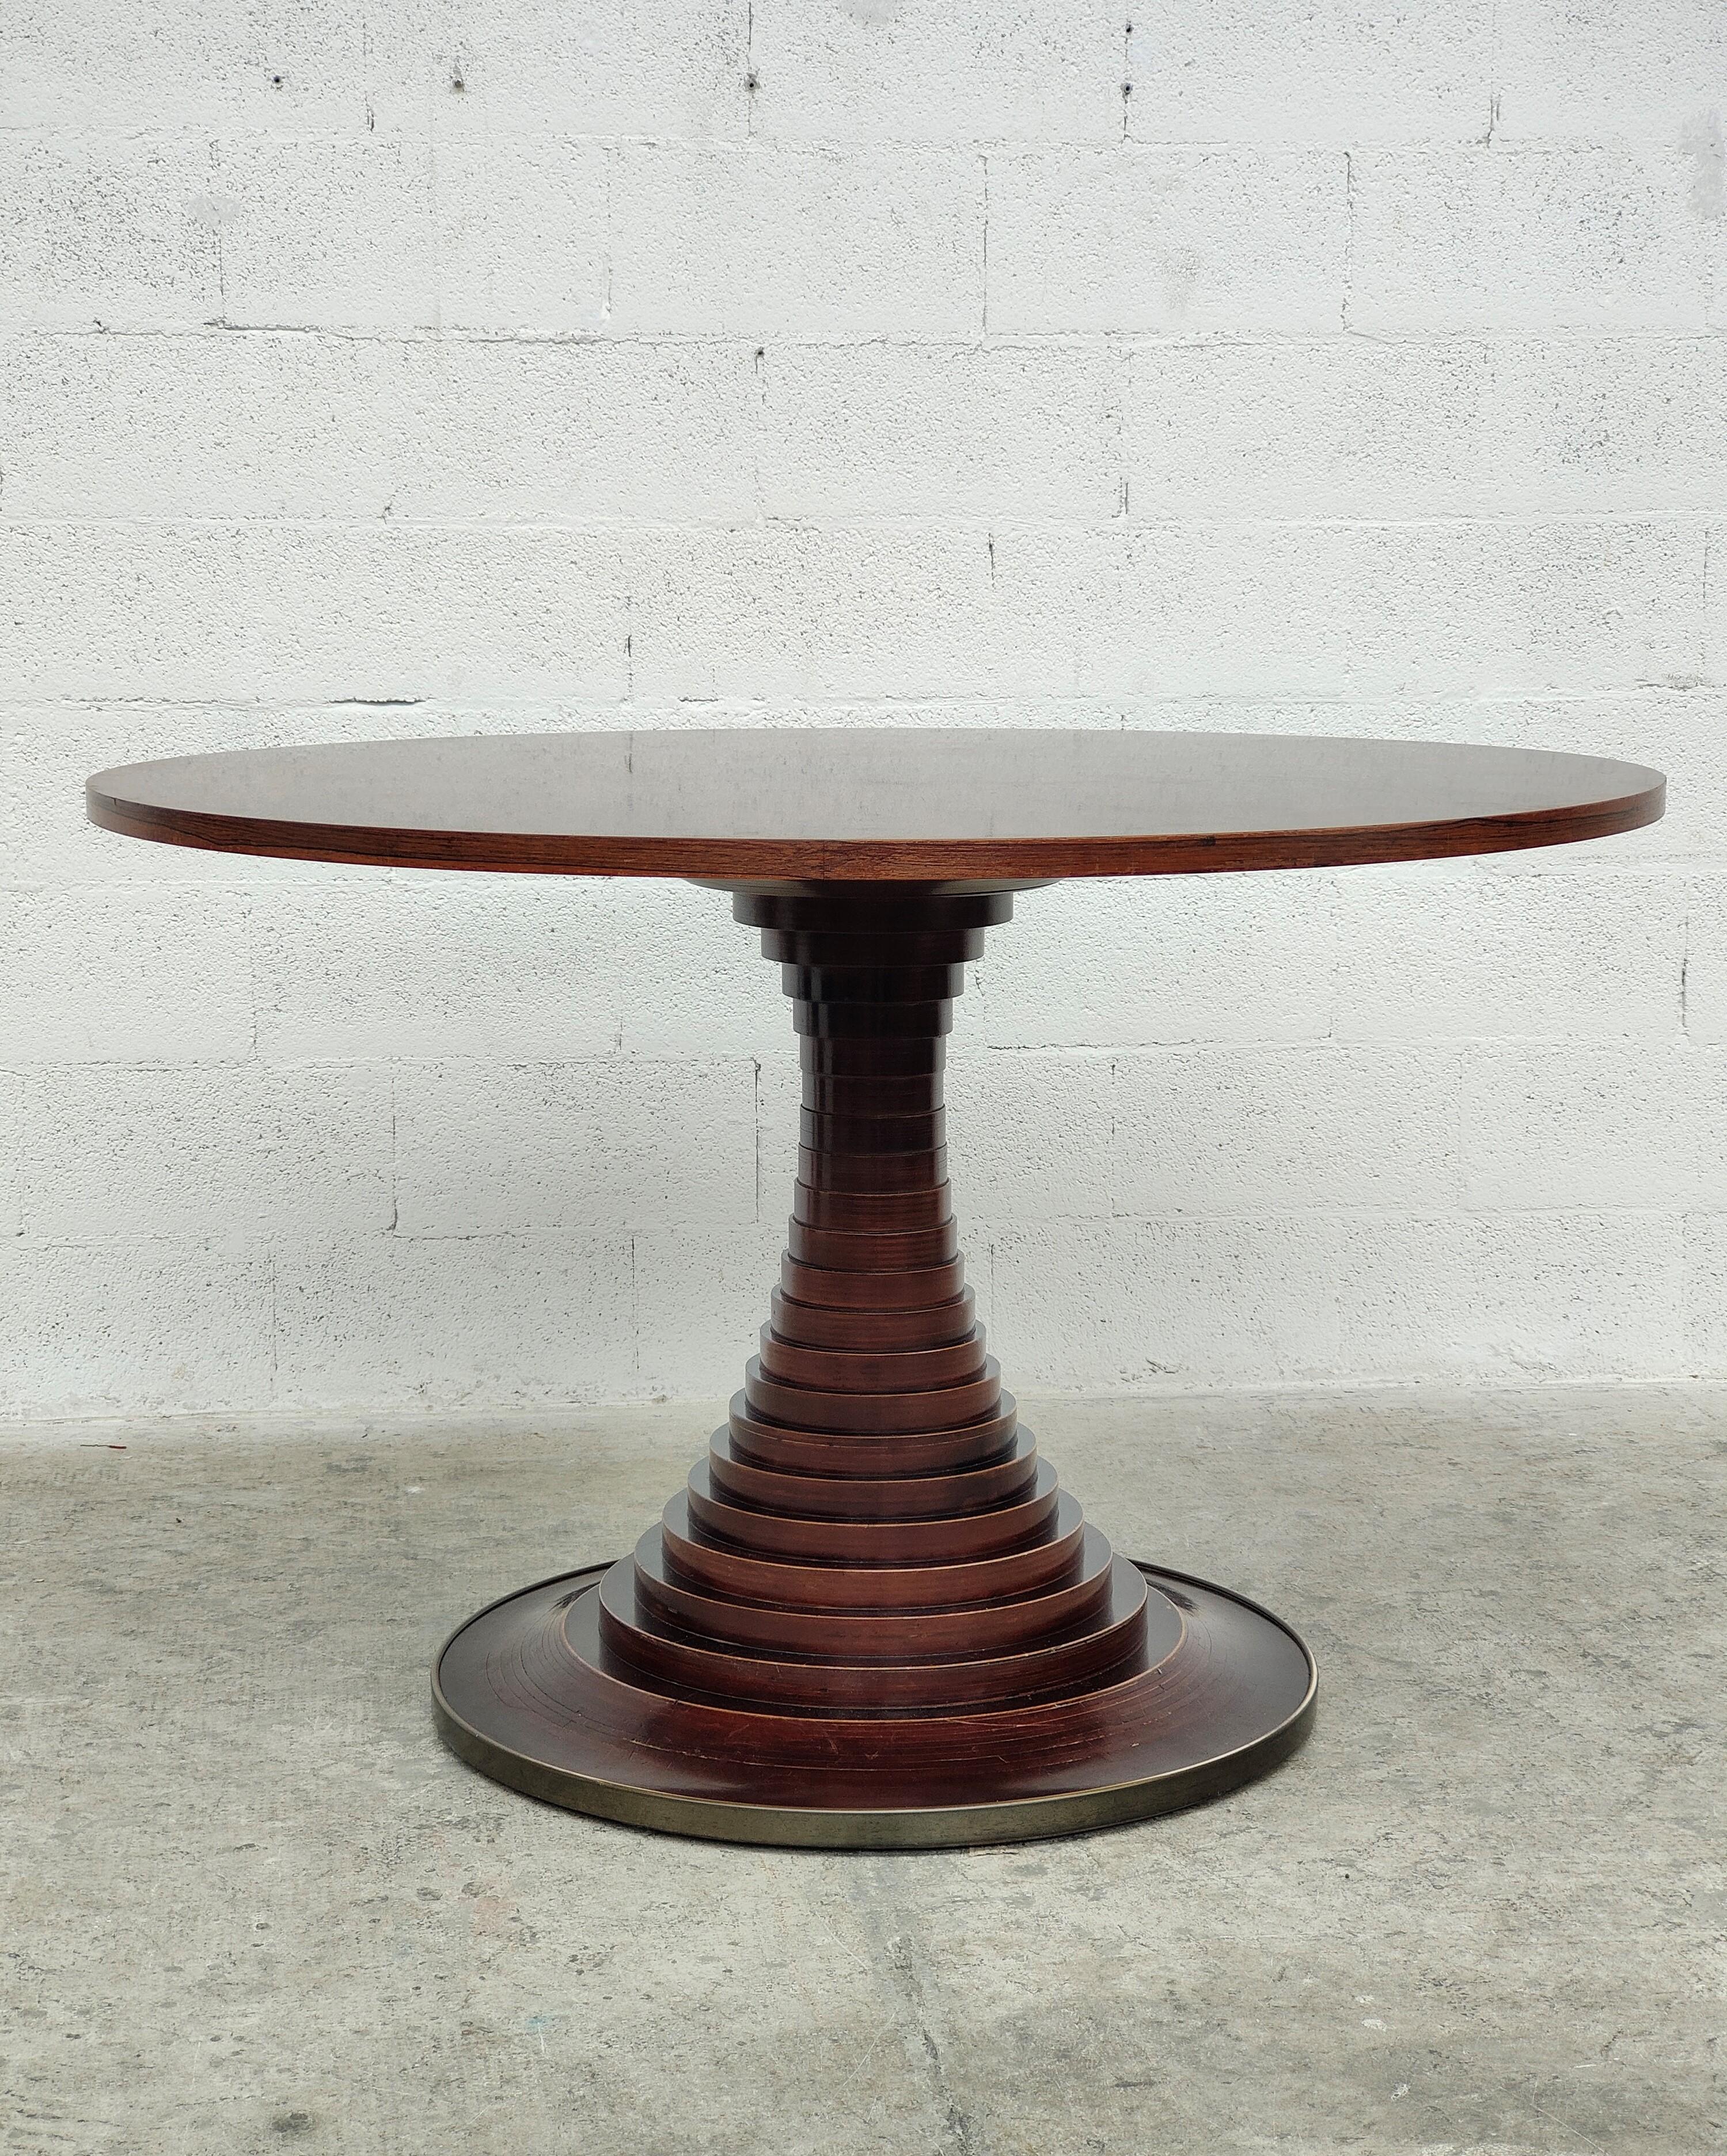 Wooden  circular dining table designed by Carlo de Carli for Sormani 1960s.
The beautiful top stands on a striking base made of solid wooden discs, with a circular brass trim detail. 
Dimensions: diameter 125 cm - height 78 cm.
 